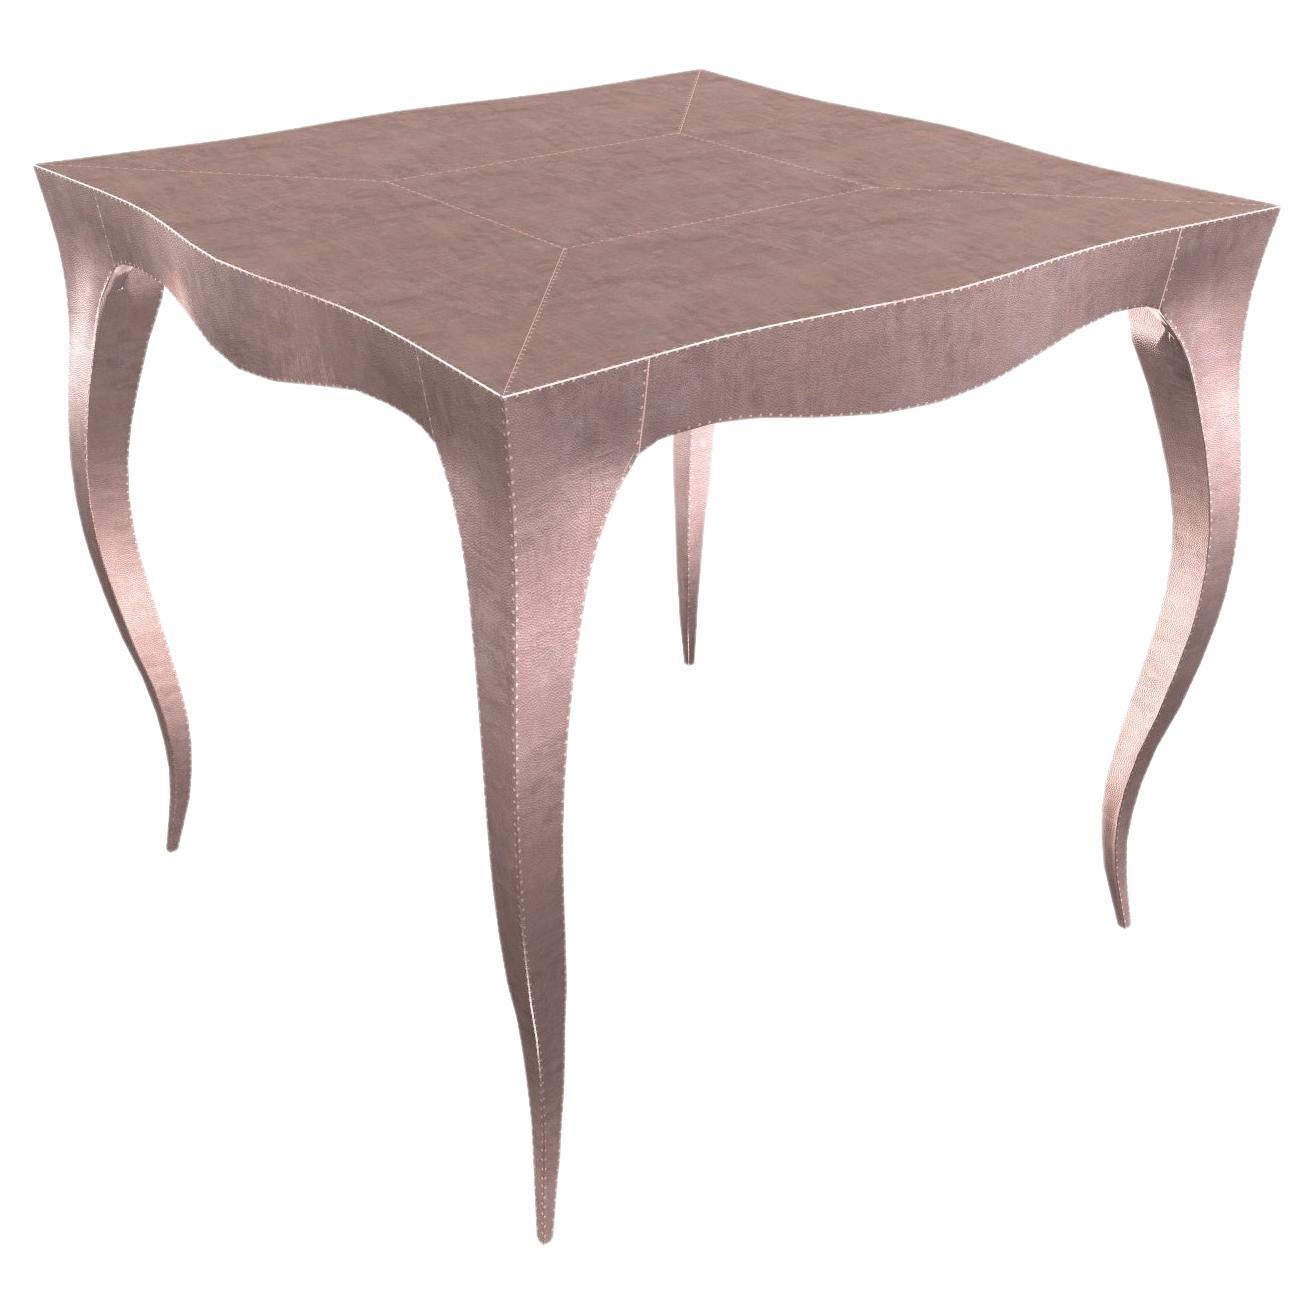 Louise Art Deco Nesting Tables and Stacking Tables Mid. Hammered Copper 